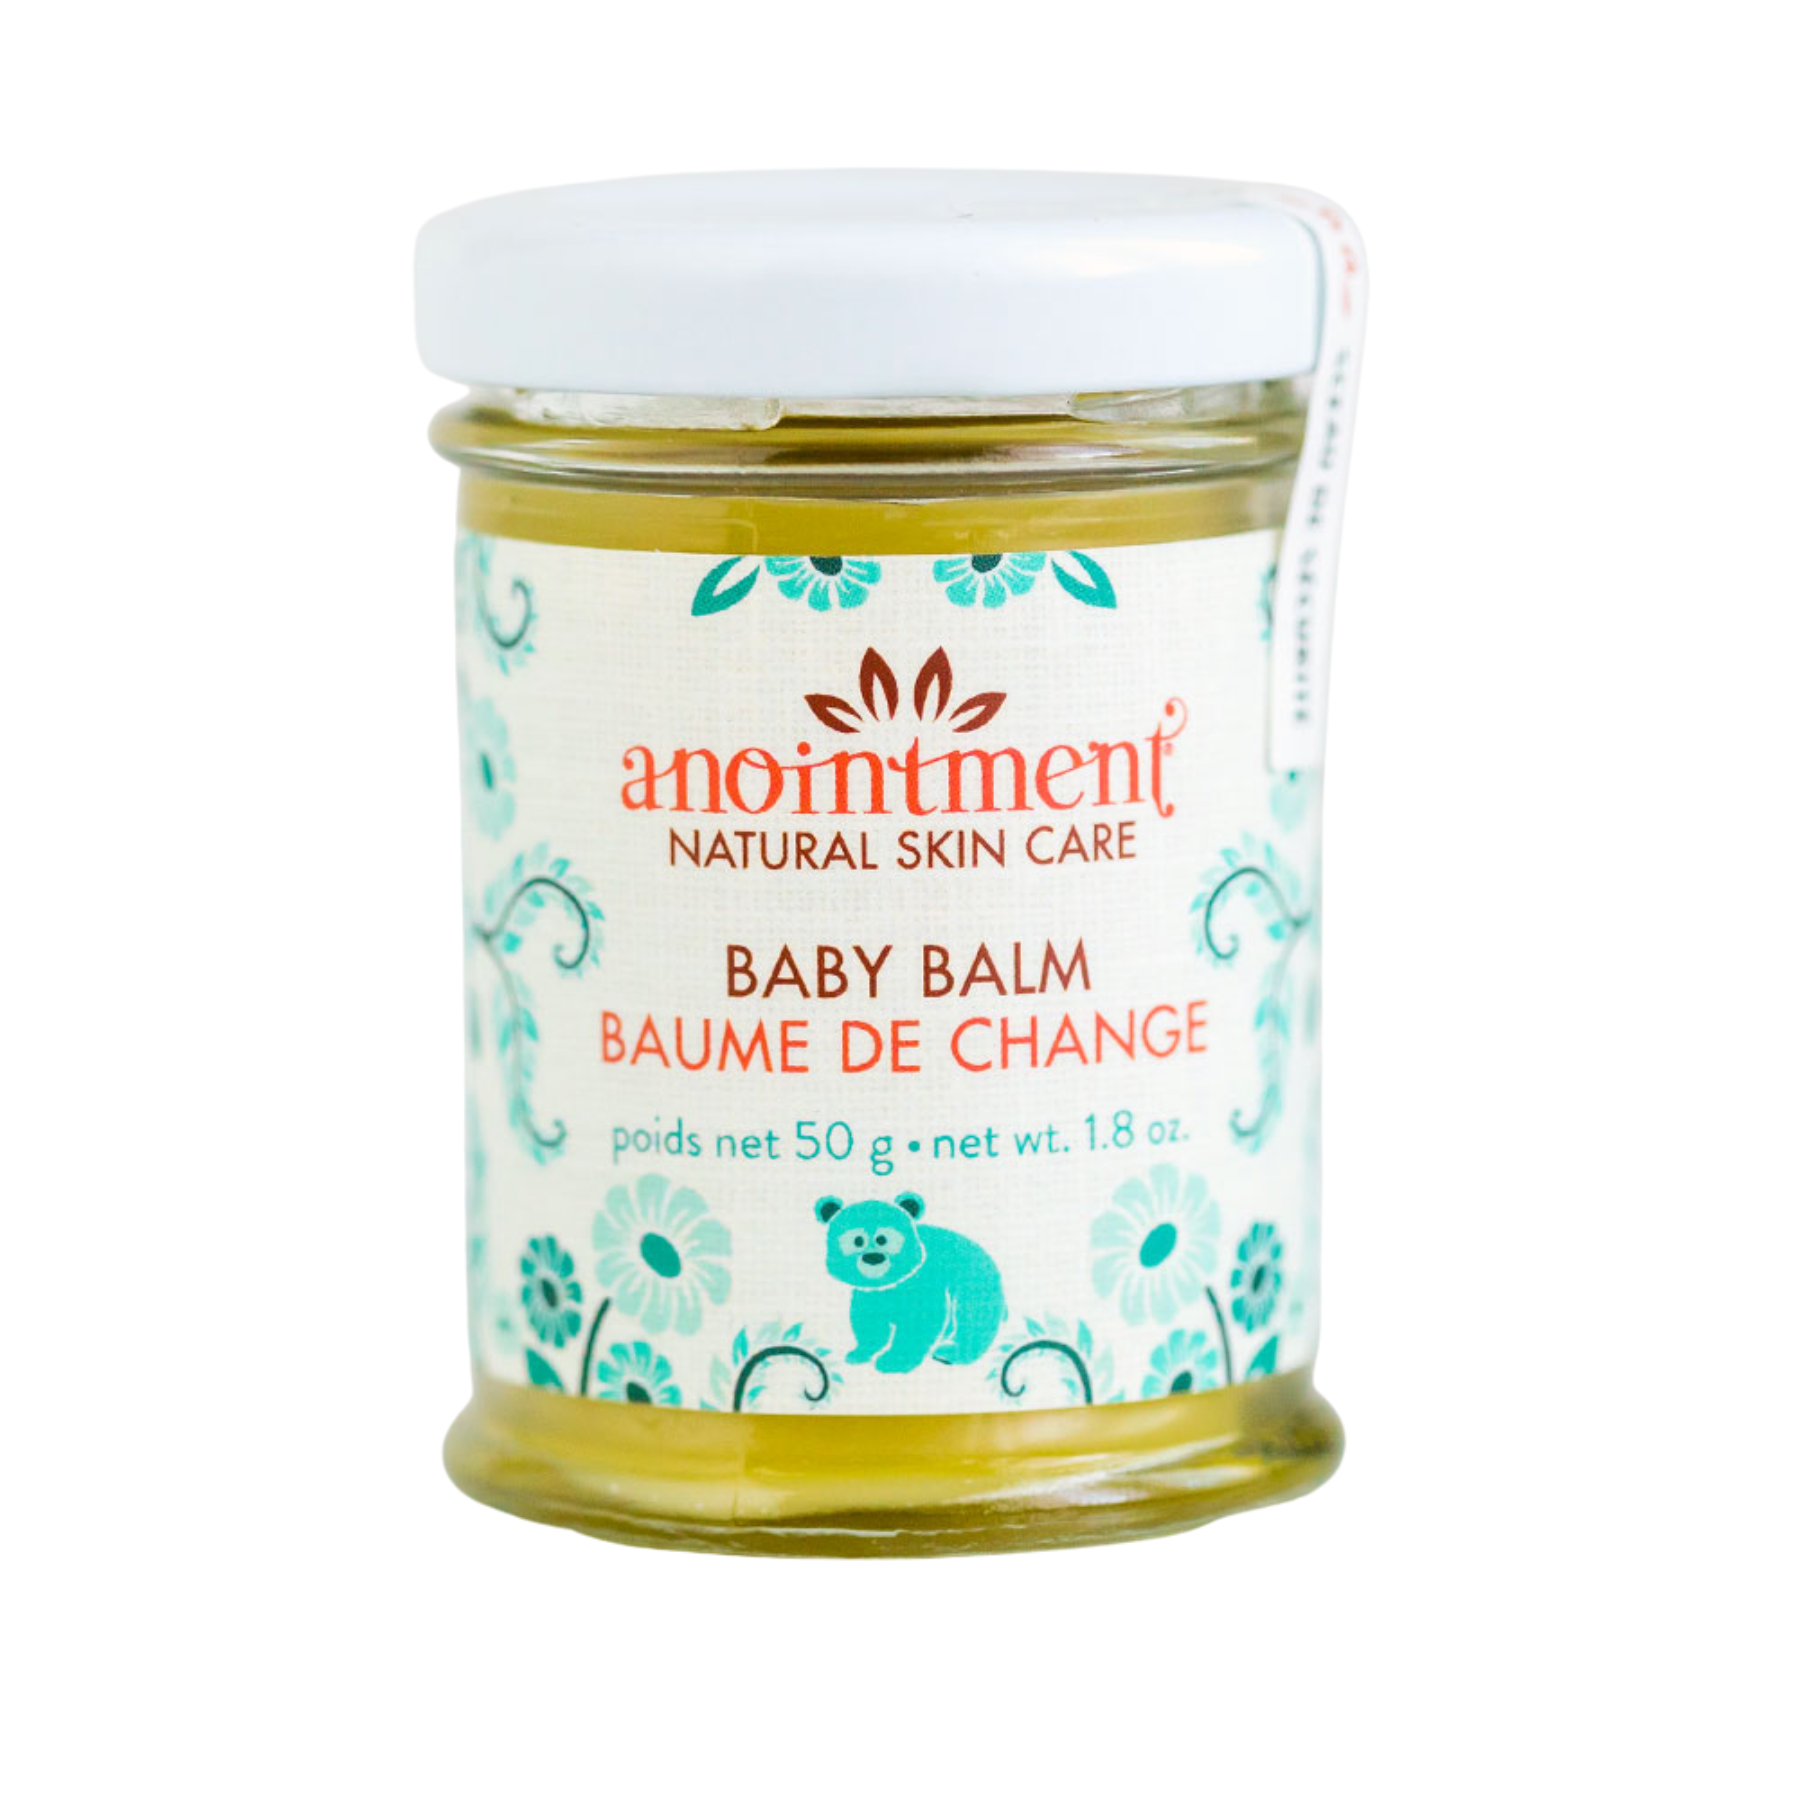 Anointment Baby Balm Assorted Sizes